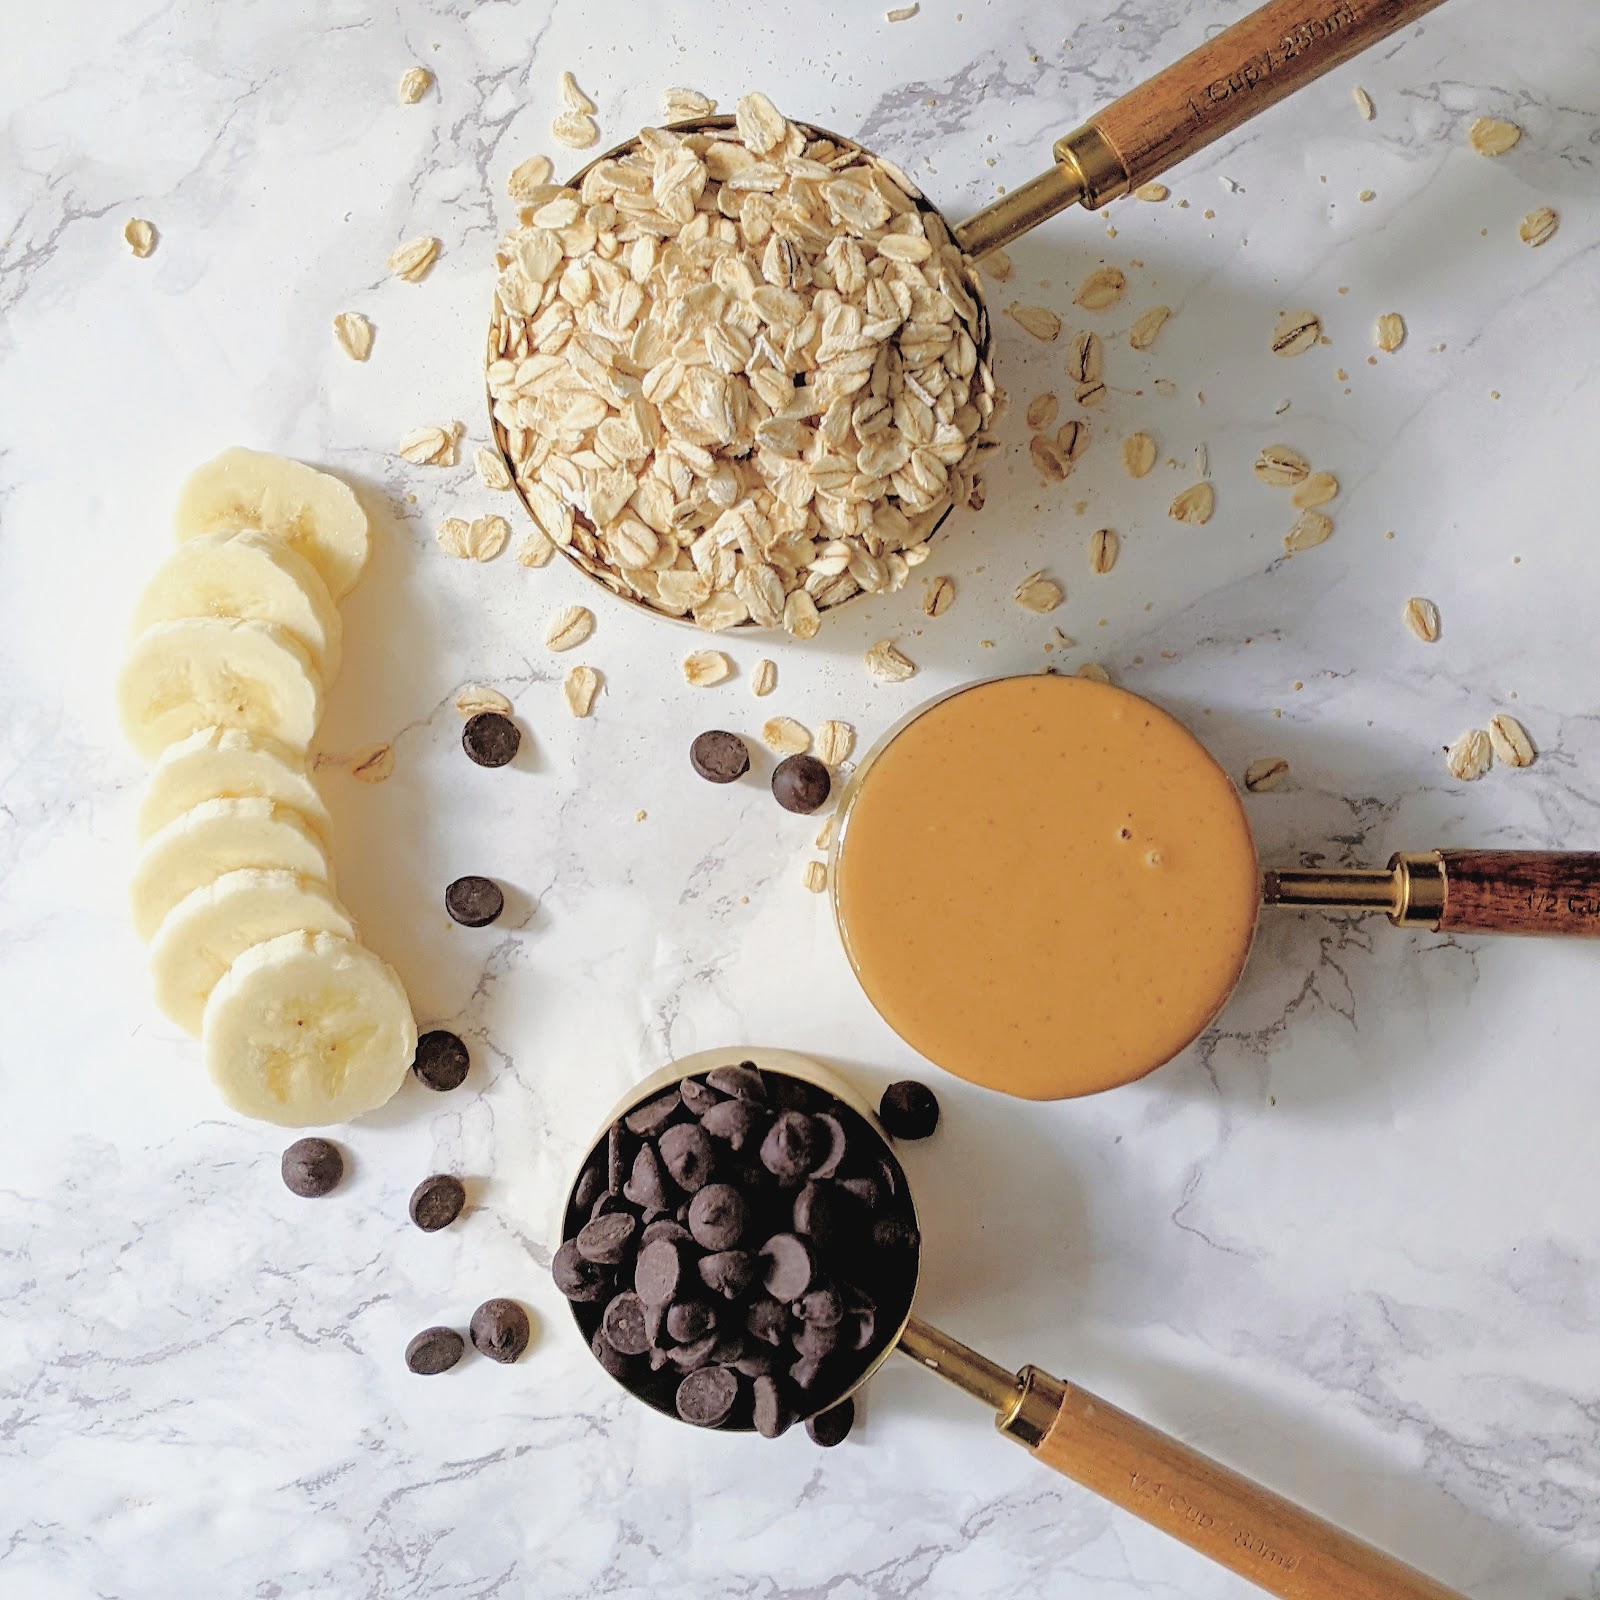 top down view of ingredients needed to make peanut butter cups including peanut butter, banana, chocolate chips, maple syrup and oats